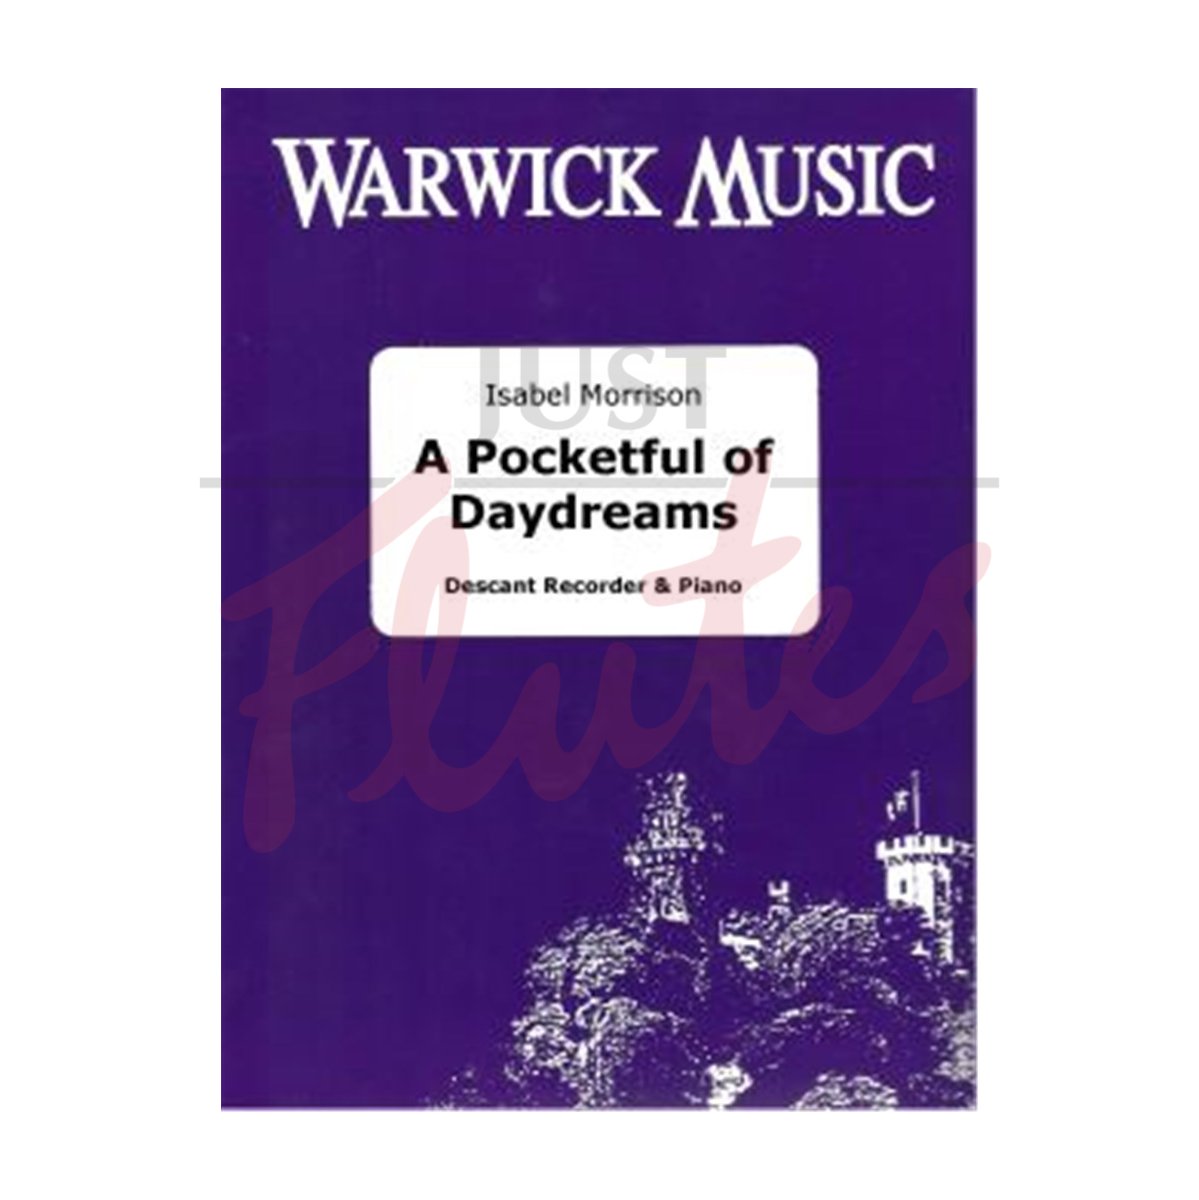 A Pocketful of Daydreams for Descant Recorder and Piano